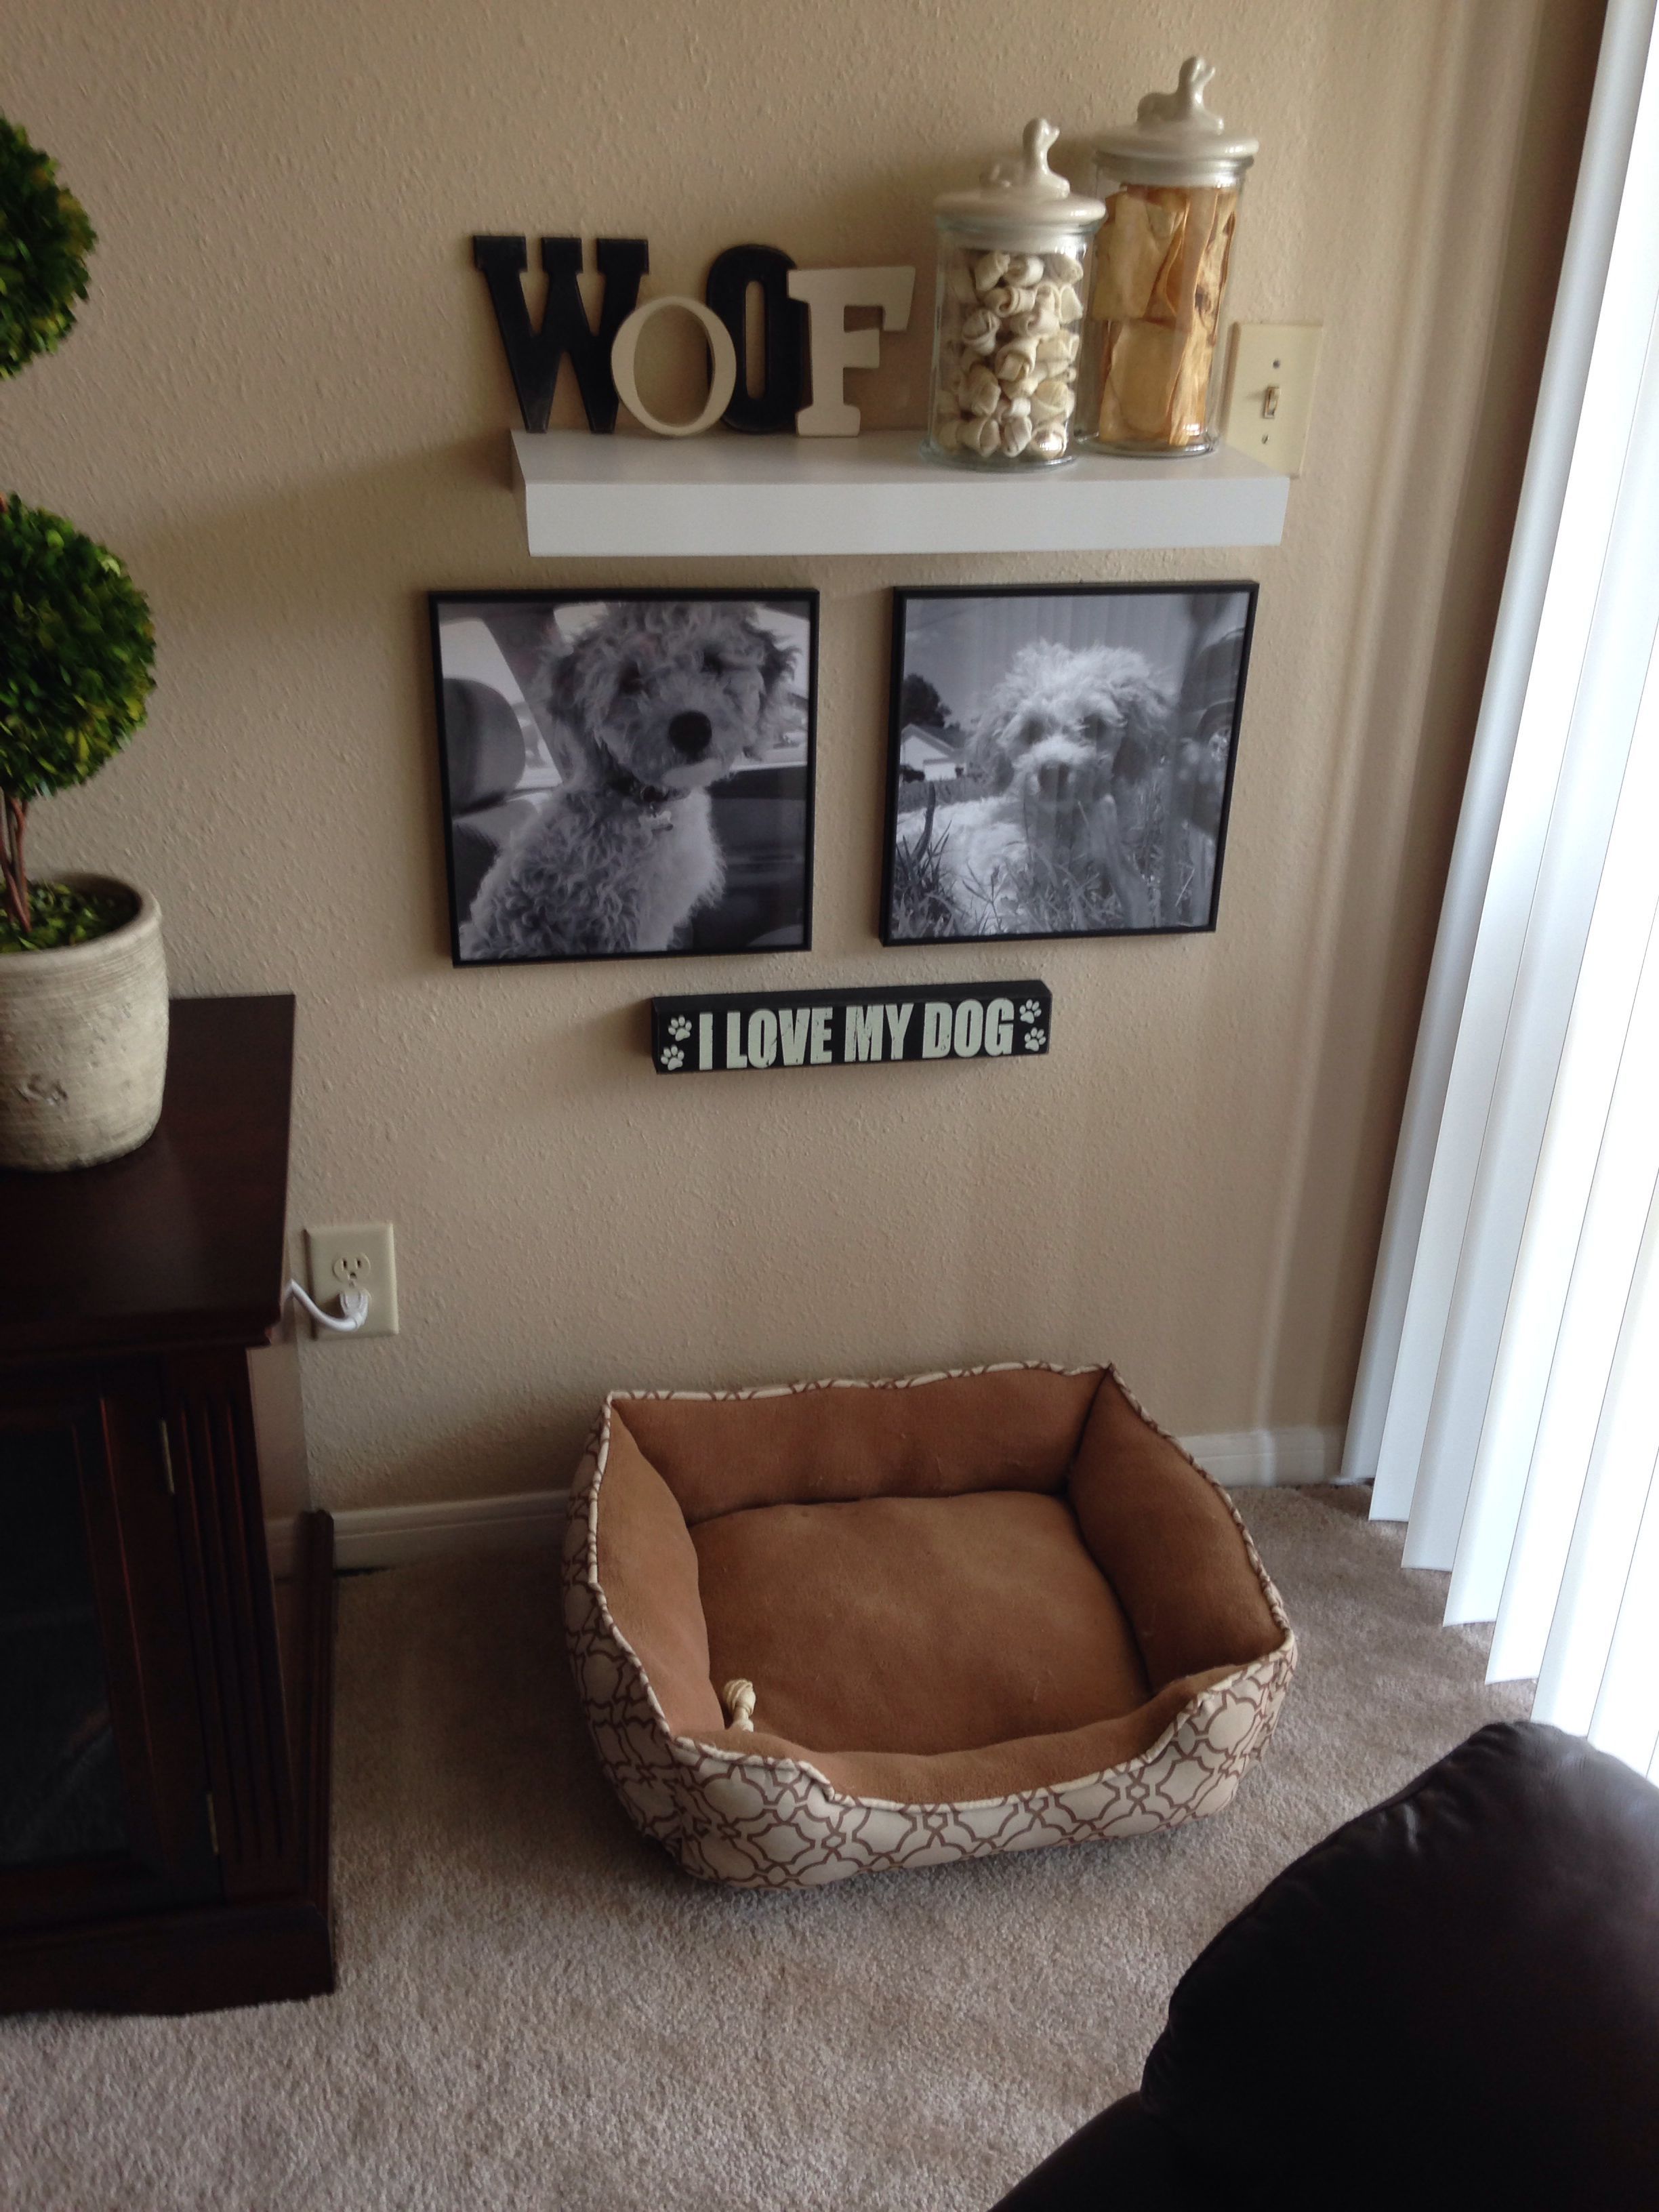 My own DIY pet corner! My puppy has his own space now in our home! Poster B&W prints from Staples and deco